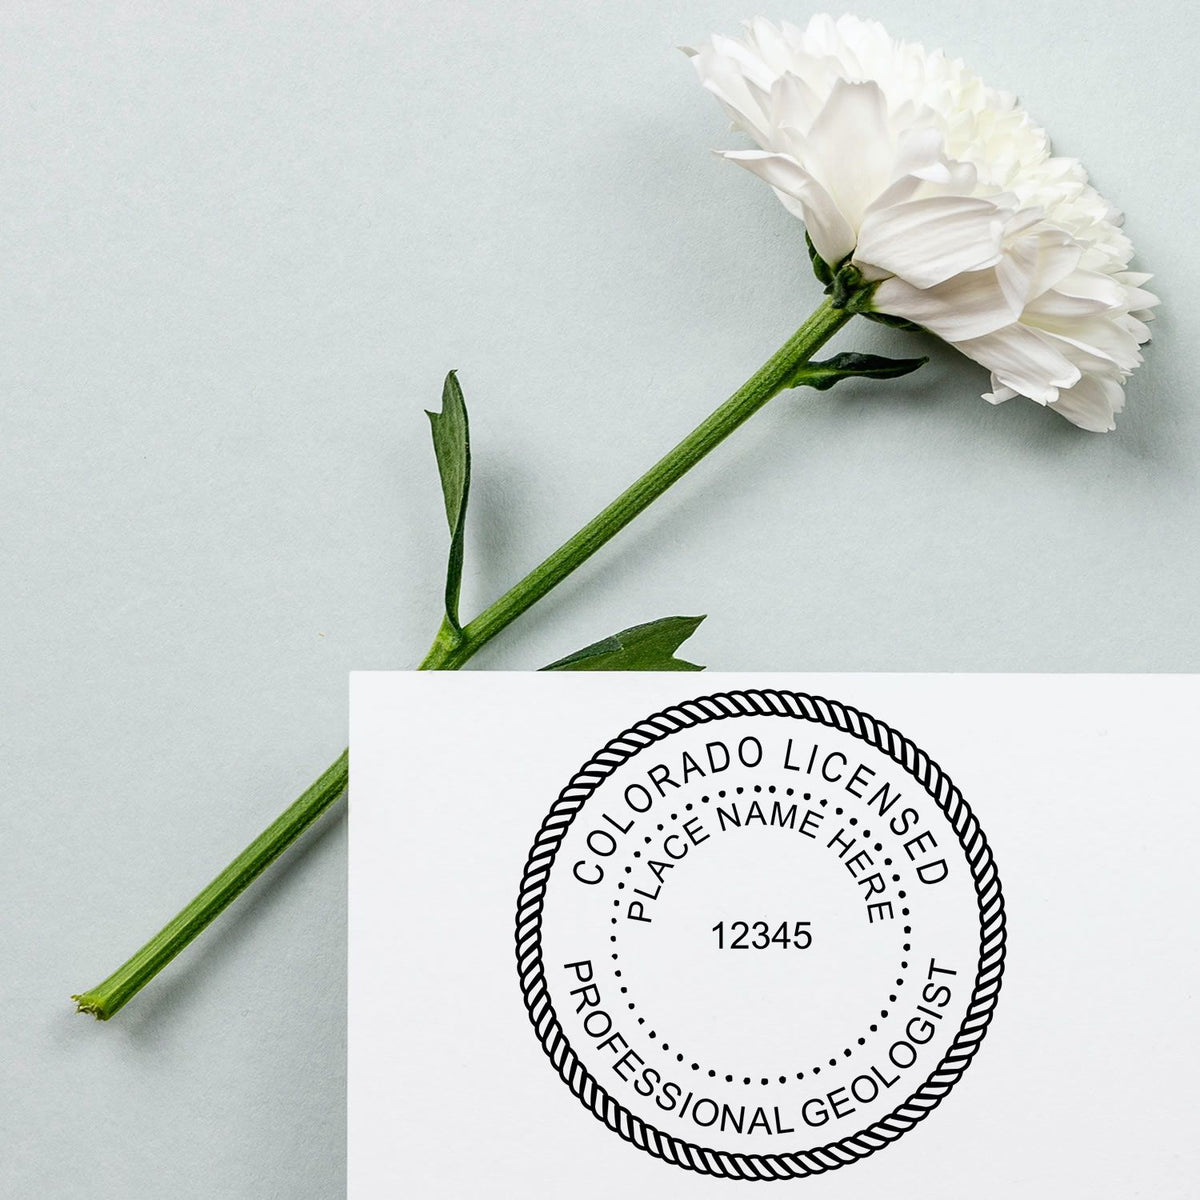 The Colorado Professional Geologist Seal Stamp stamp impression comes to life with a crisp, detailed image stamped on paper - showcasing true professional quality.